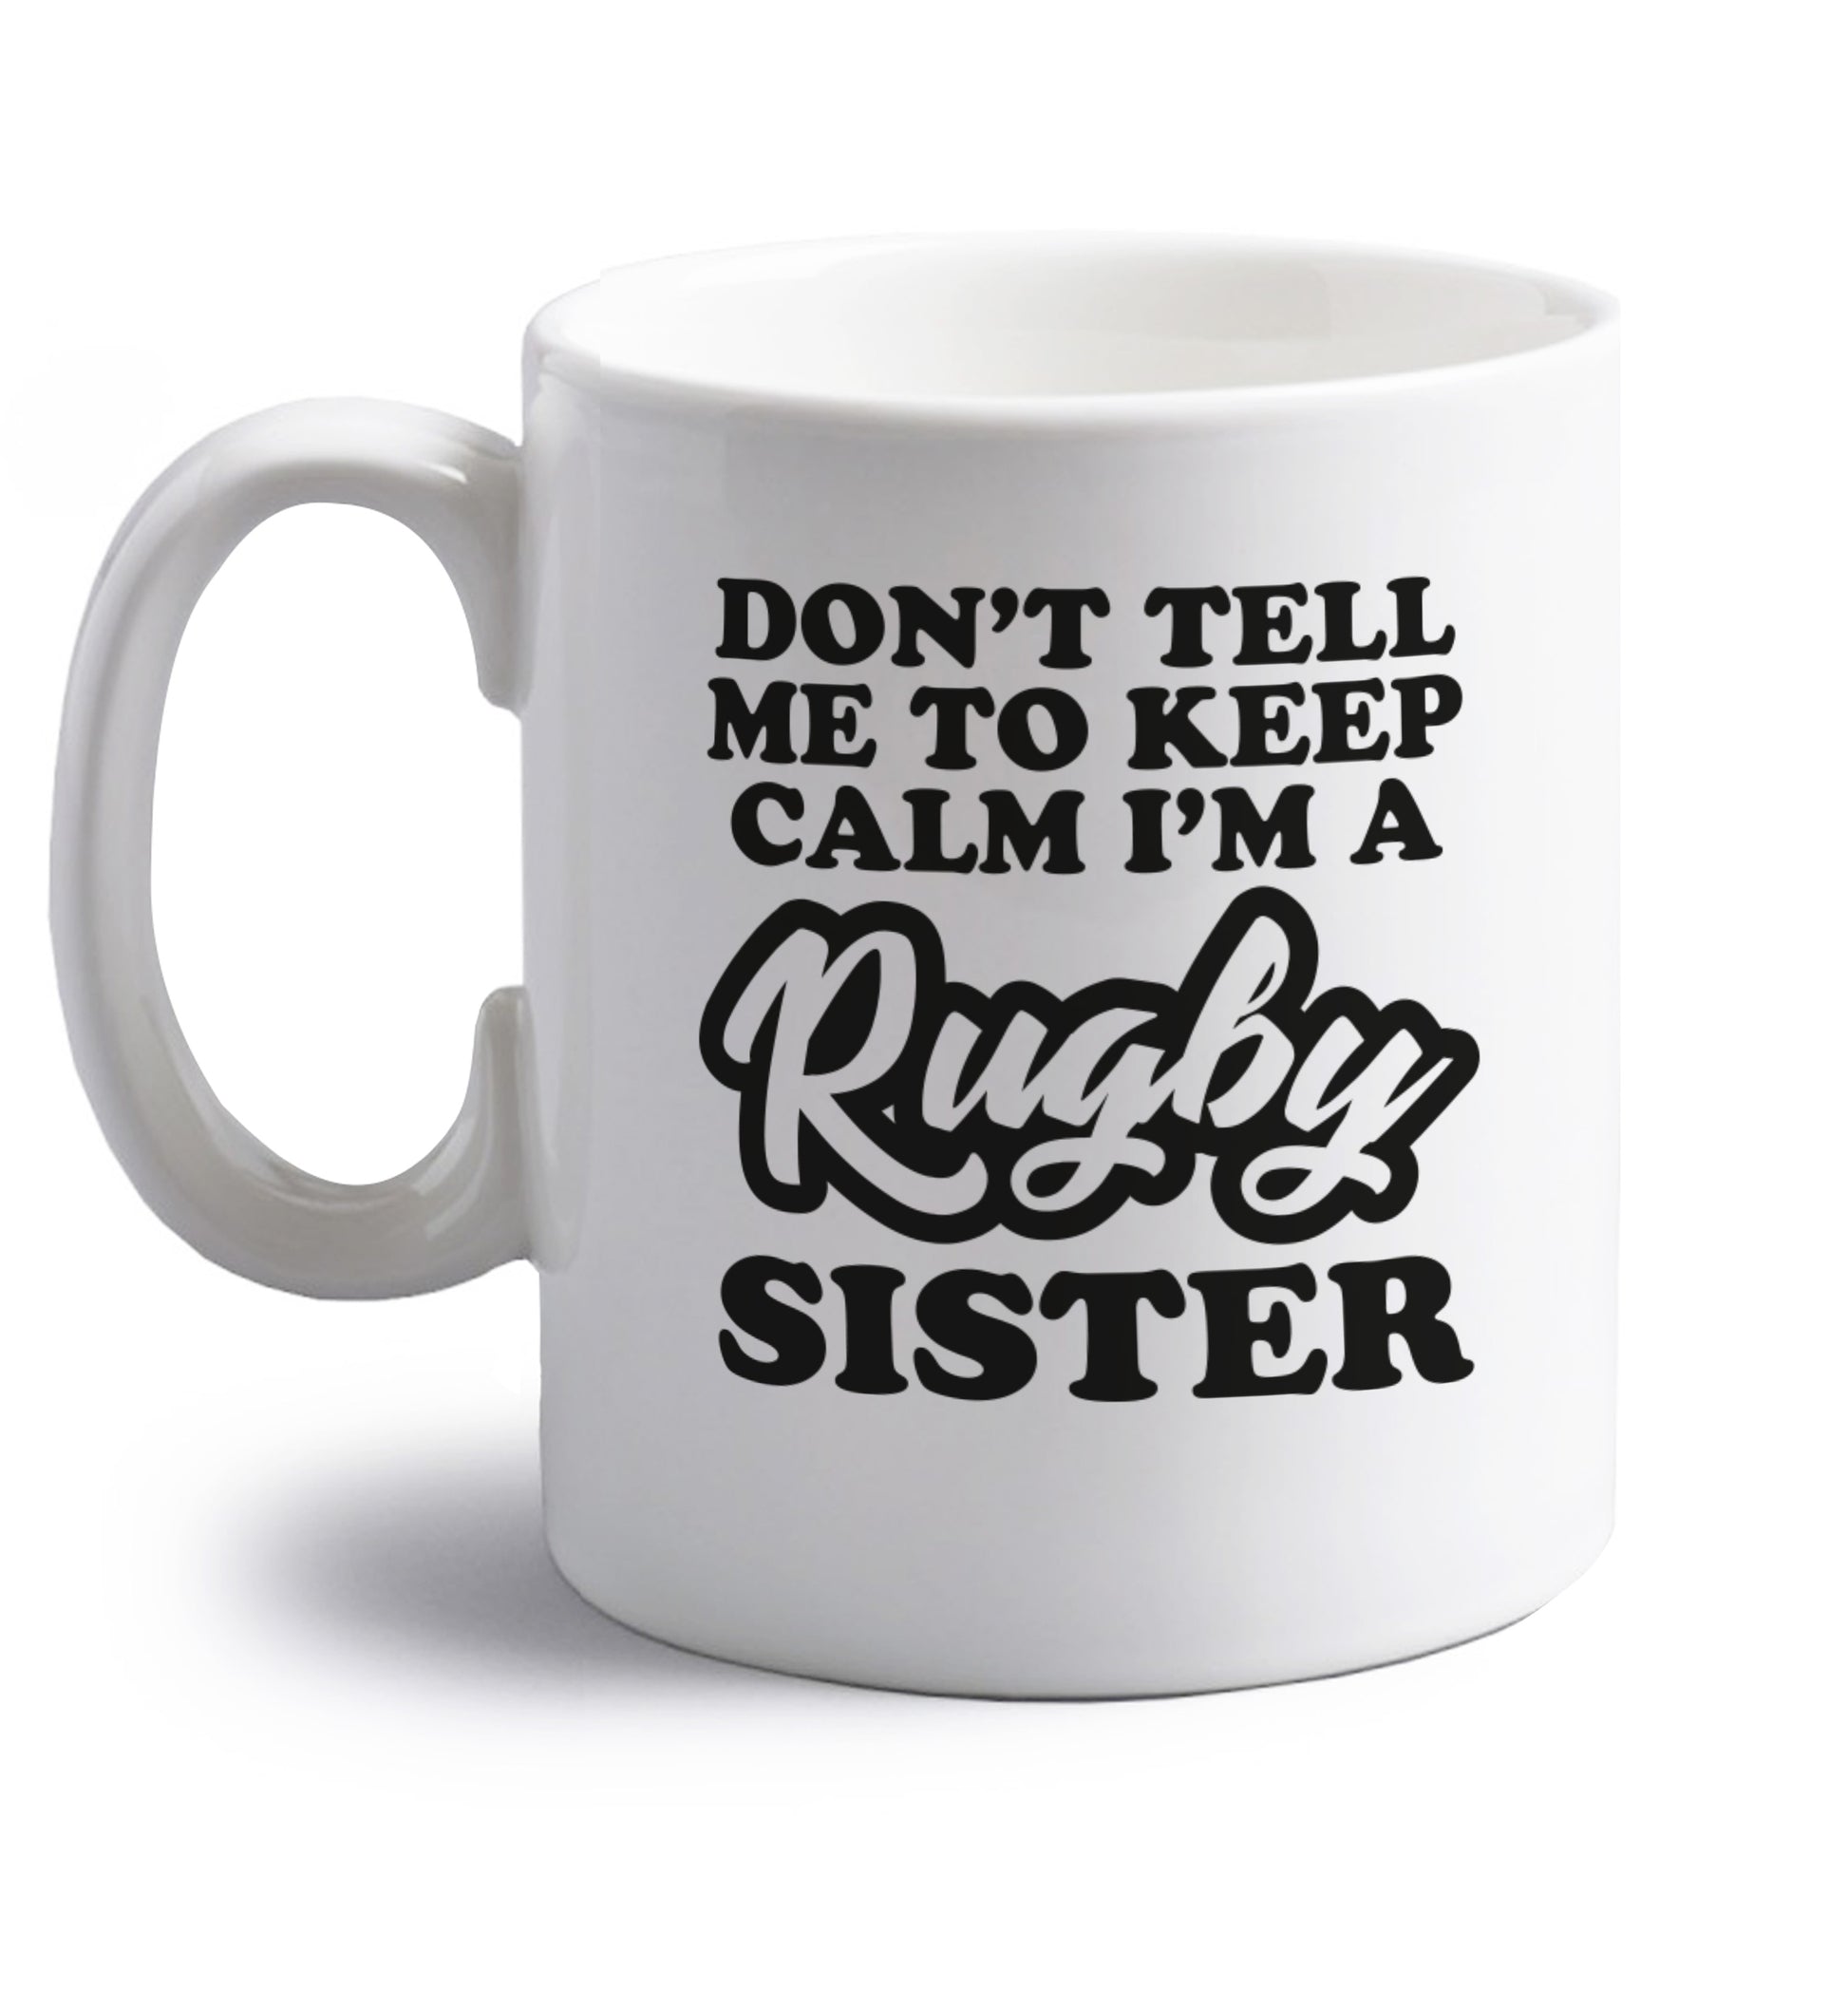 Don't tell me keep calm I'm a rugby sister right handed white ceramic mug 